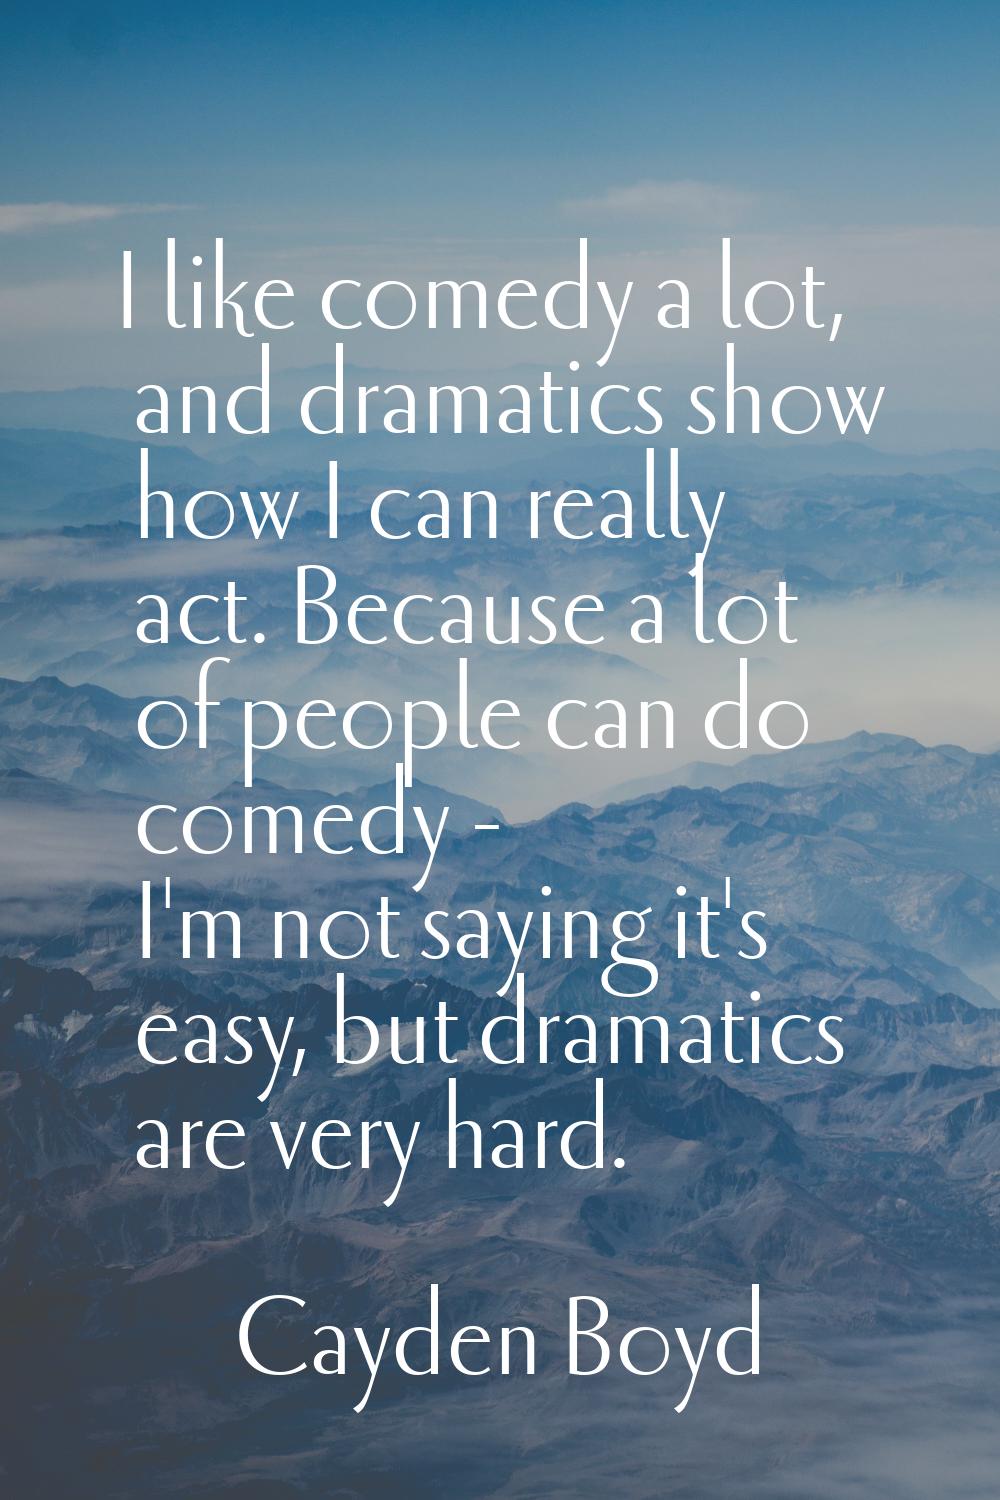 I like comedy a lot, and dramatics show how I can really act. Because a lot of people can do comedy